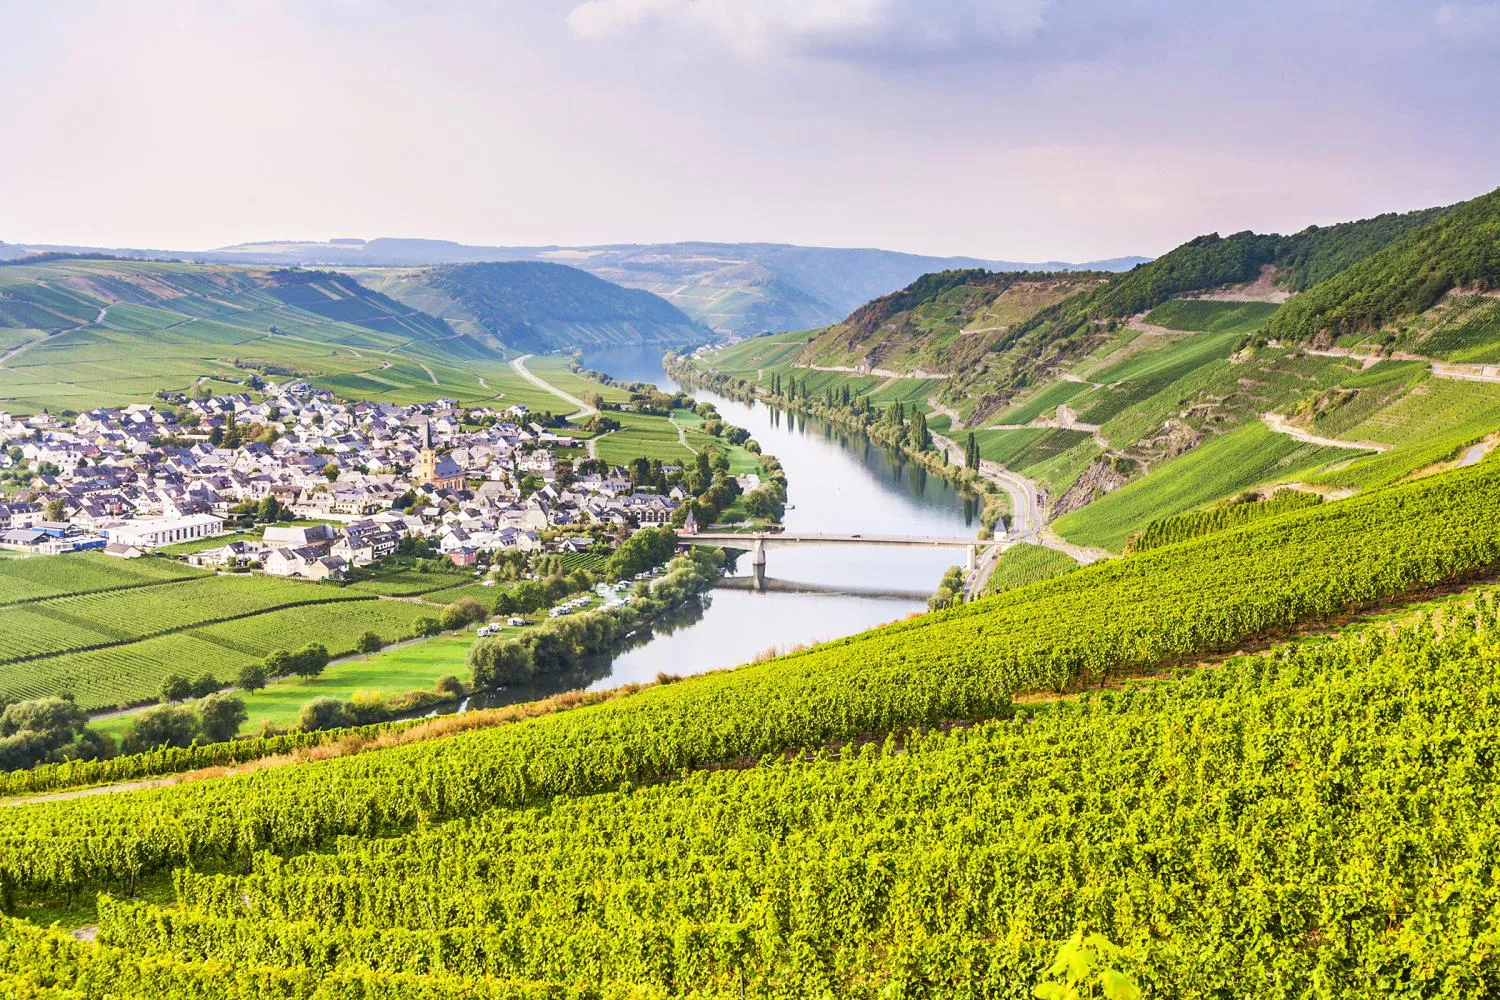 Tour the Eifel Mountains and Mosel Wine Region in supercars on a luxury driving tour